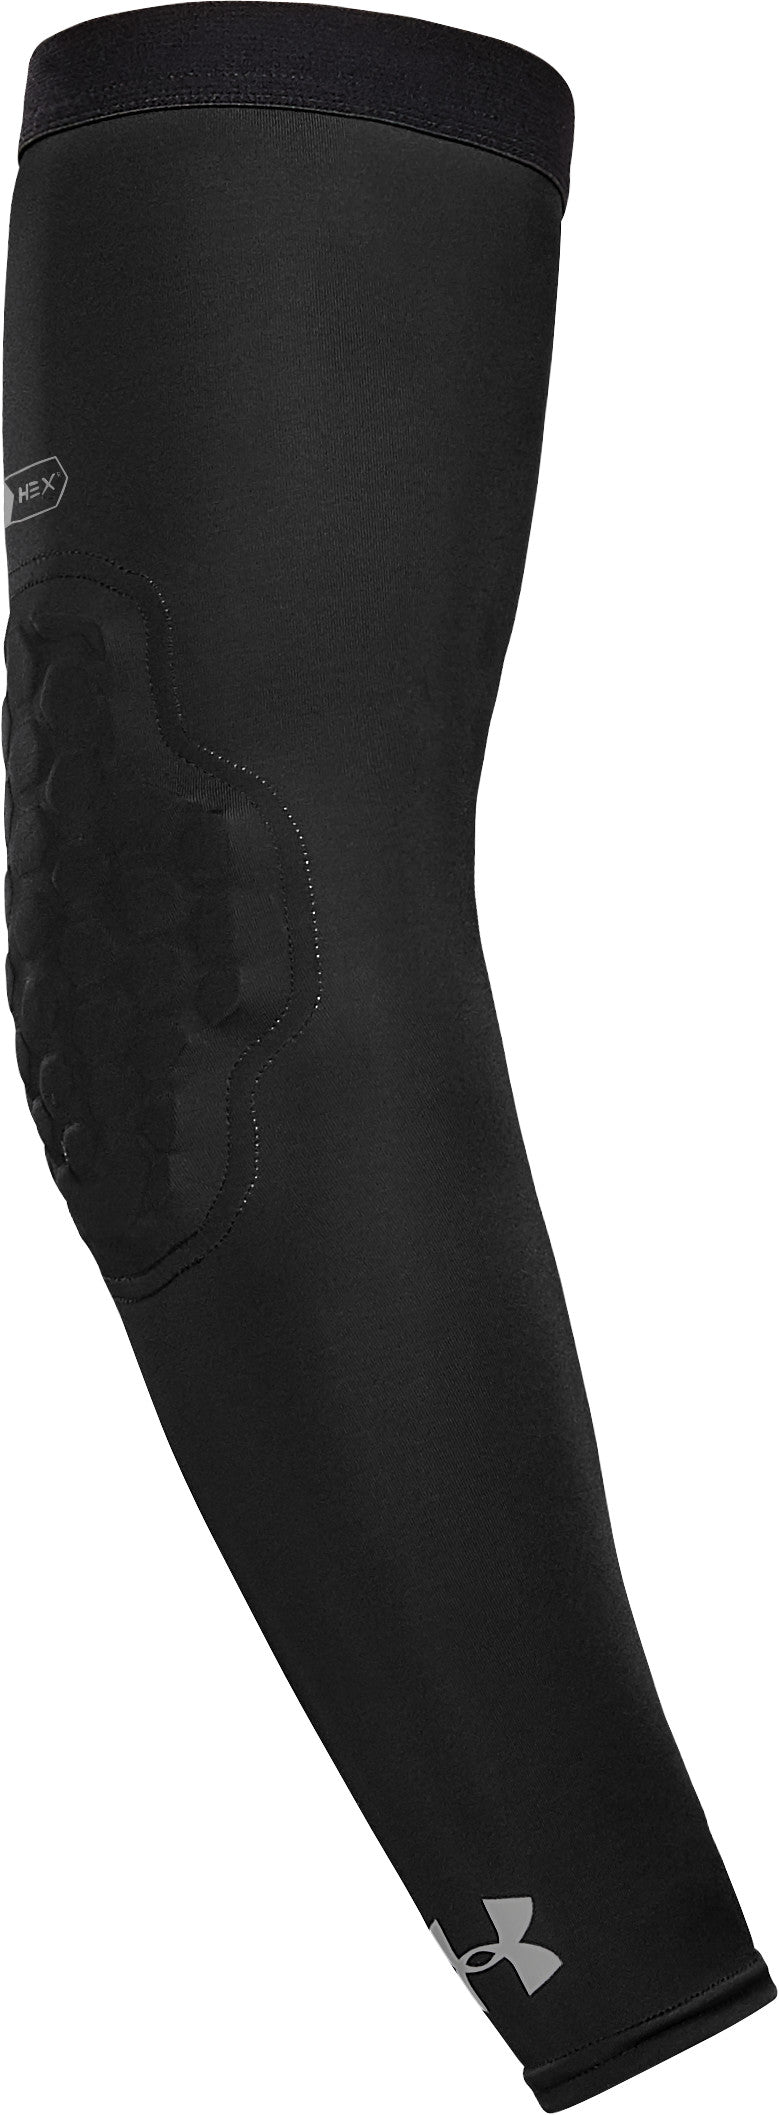 Under Armour Gameday Armour Pro Padded FB Elbow Sleeve